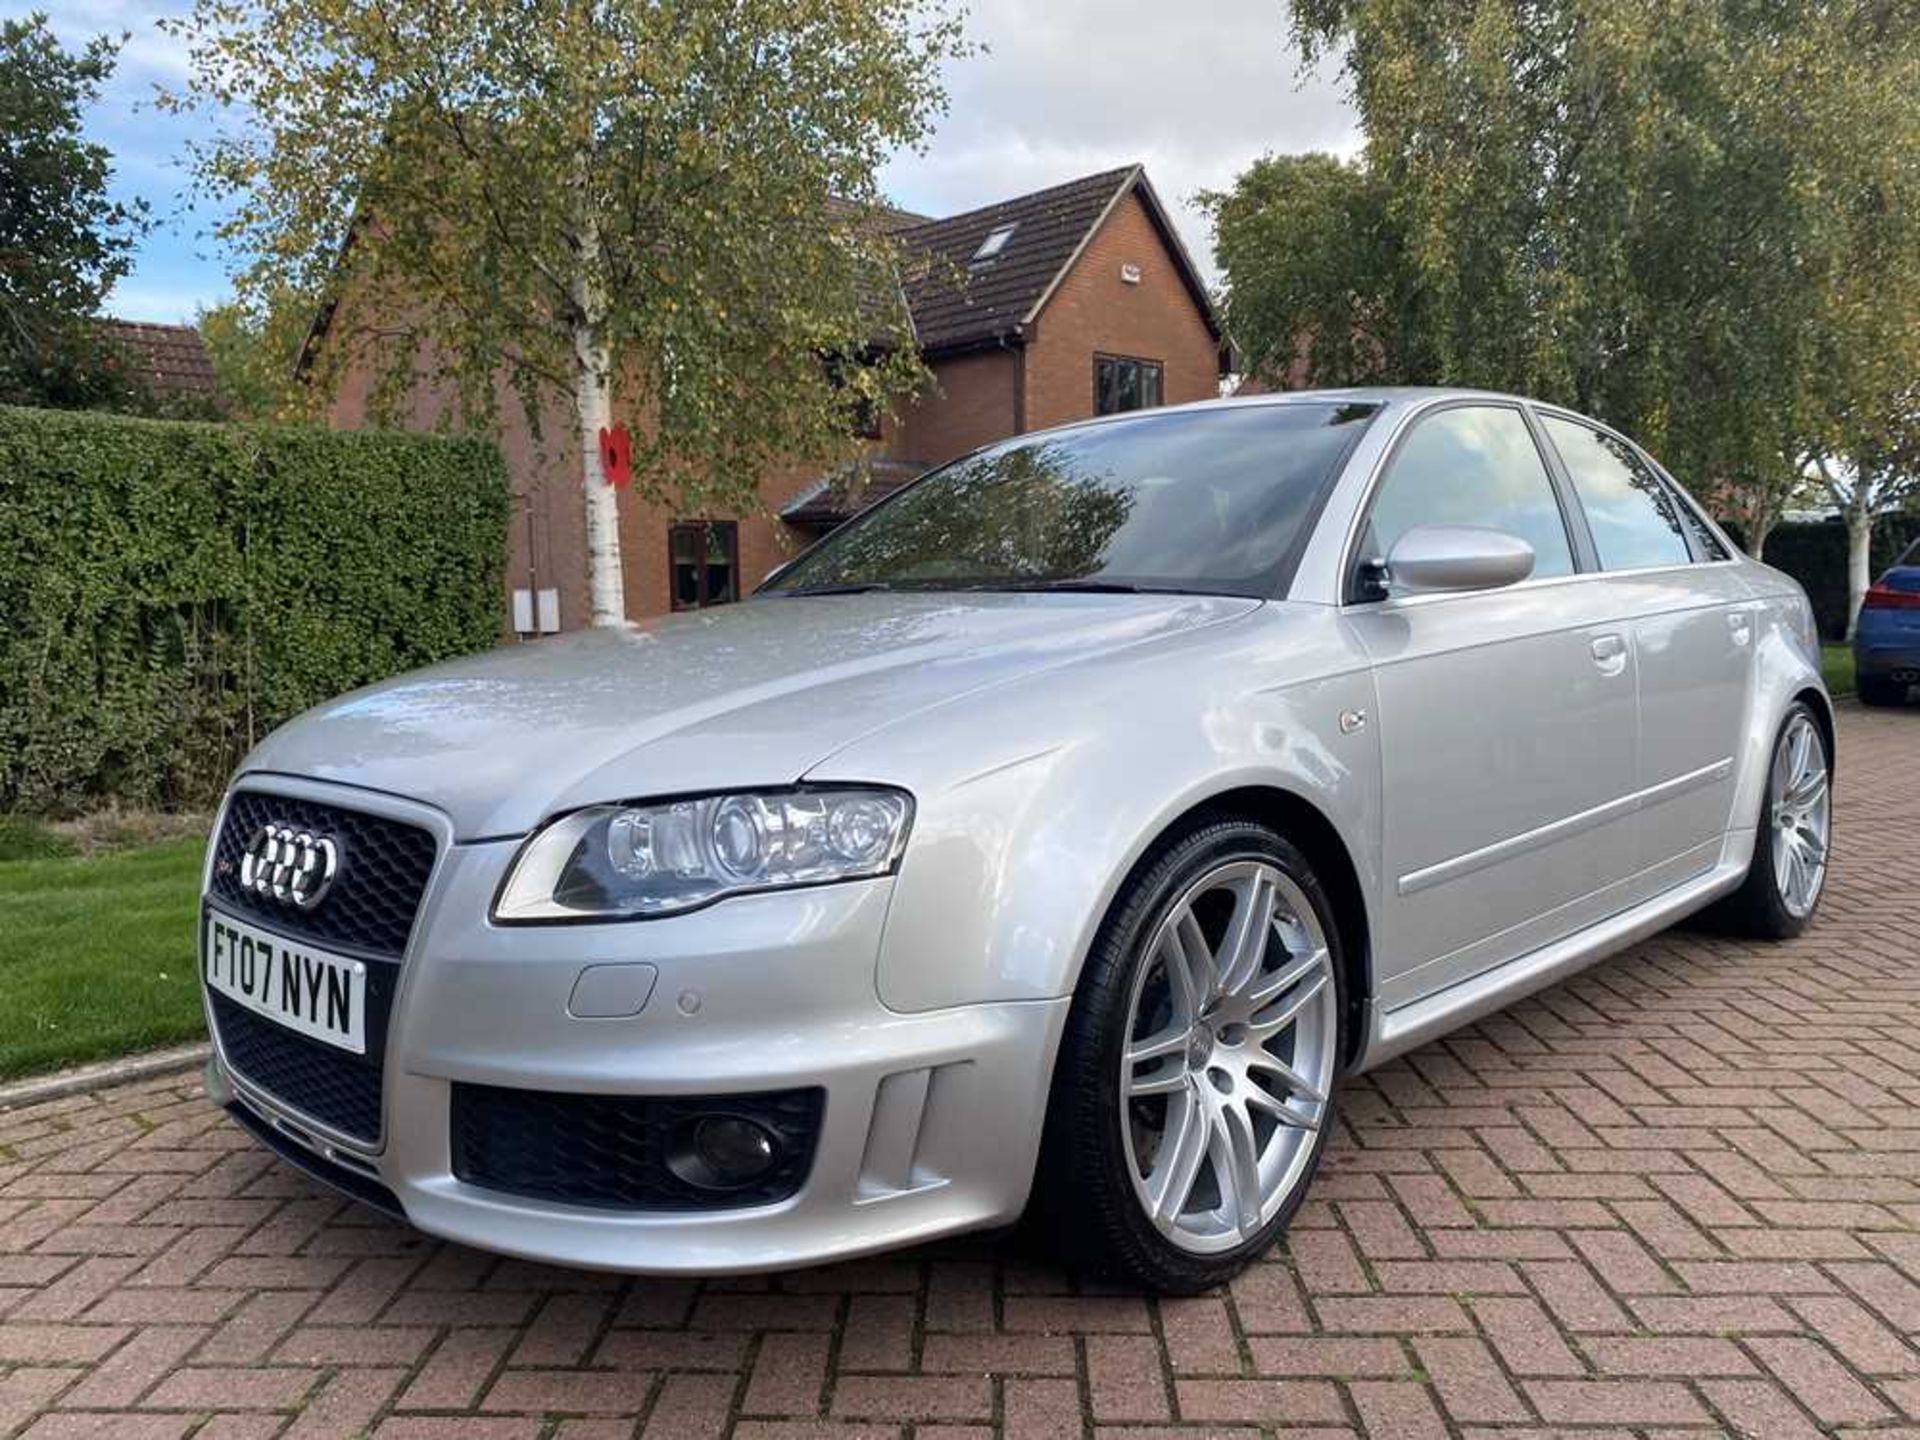 2007 Audi RS4 Saloon One owner and just c.60,000 miles from new - Image 8 of 86